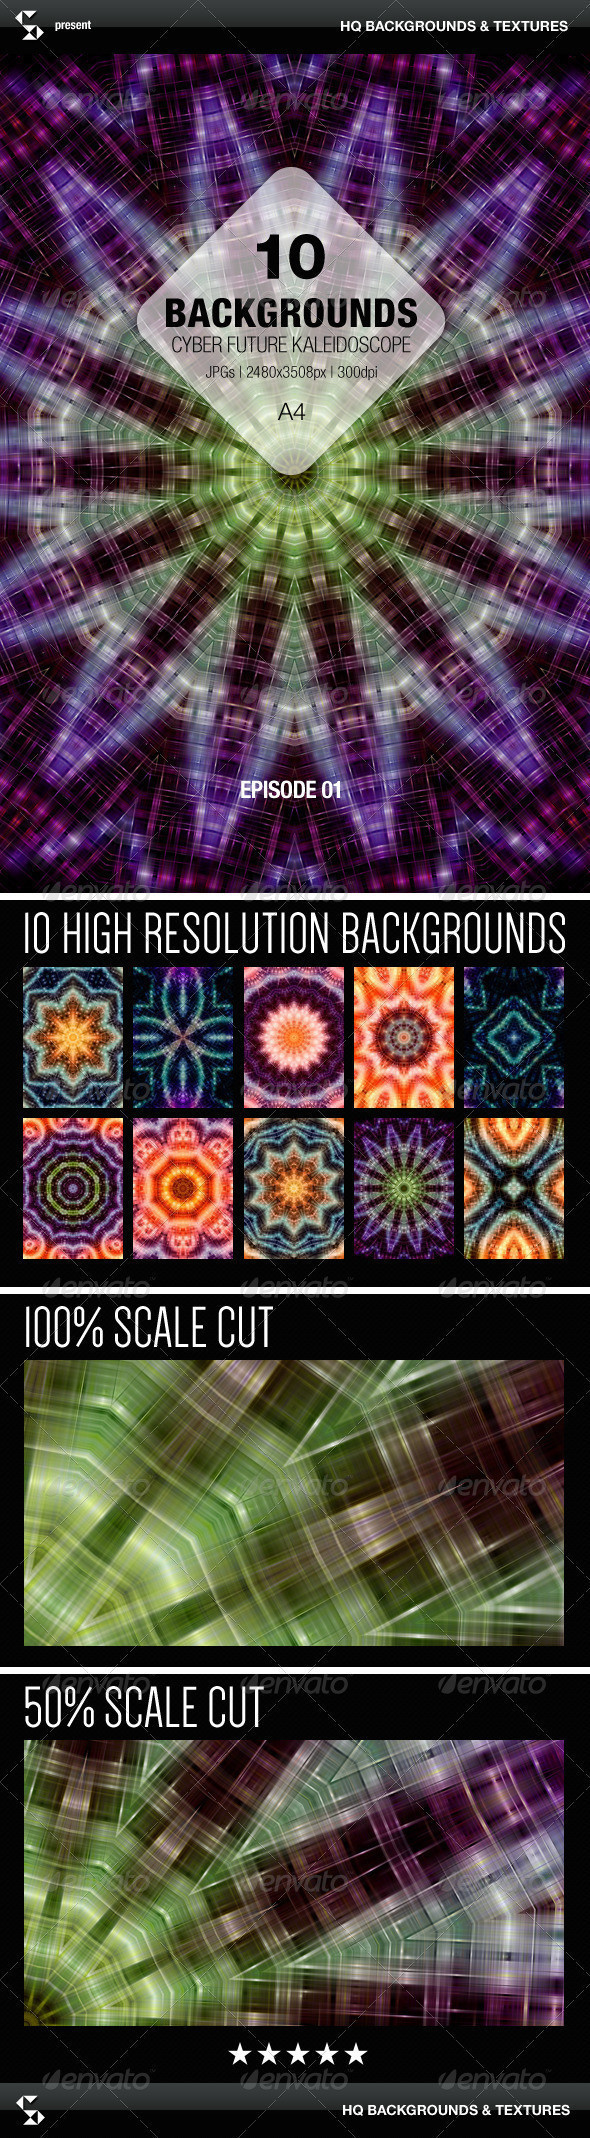 Cyber future kaleidoscope backgrounds 01 preview